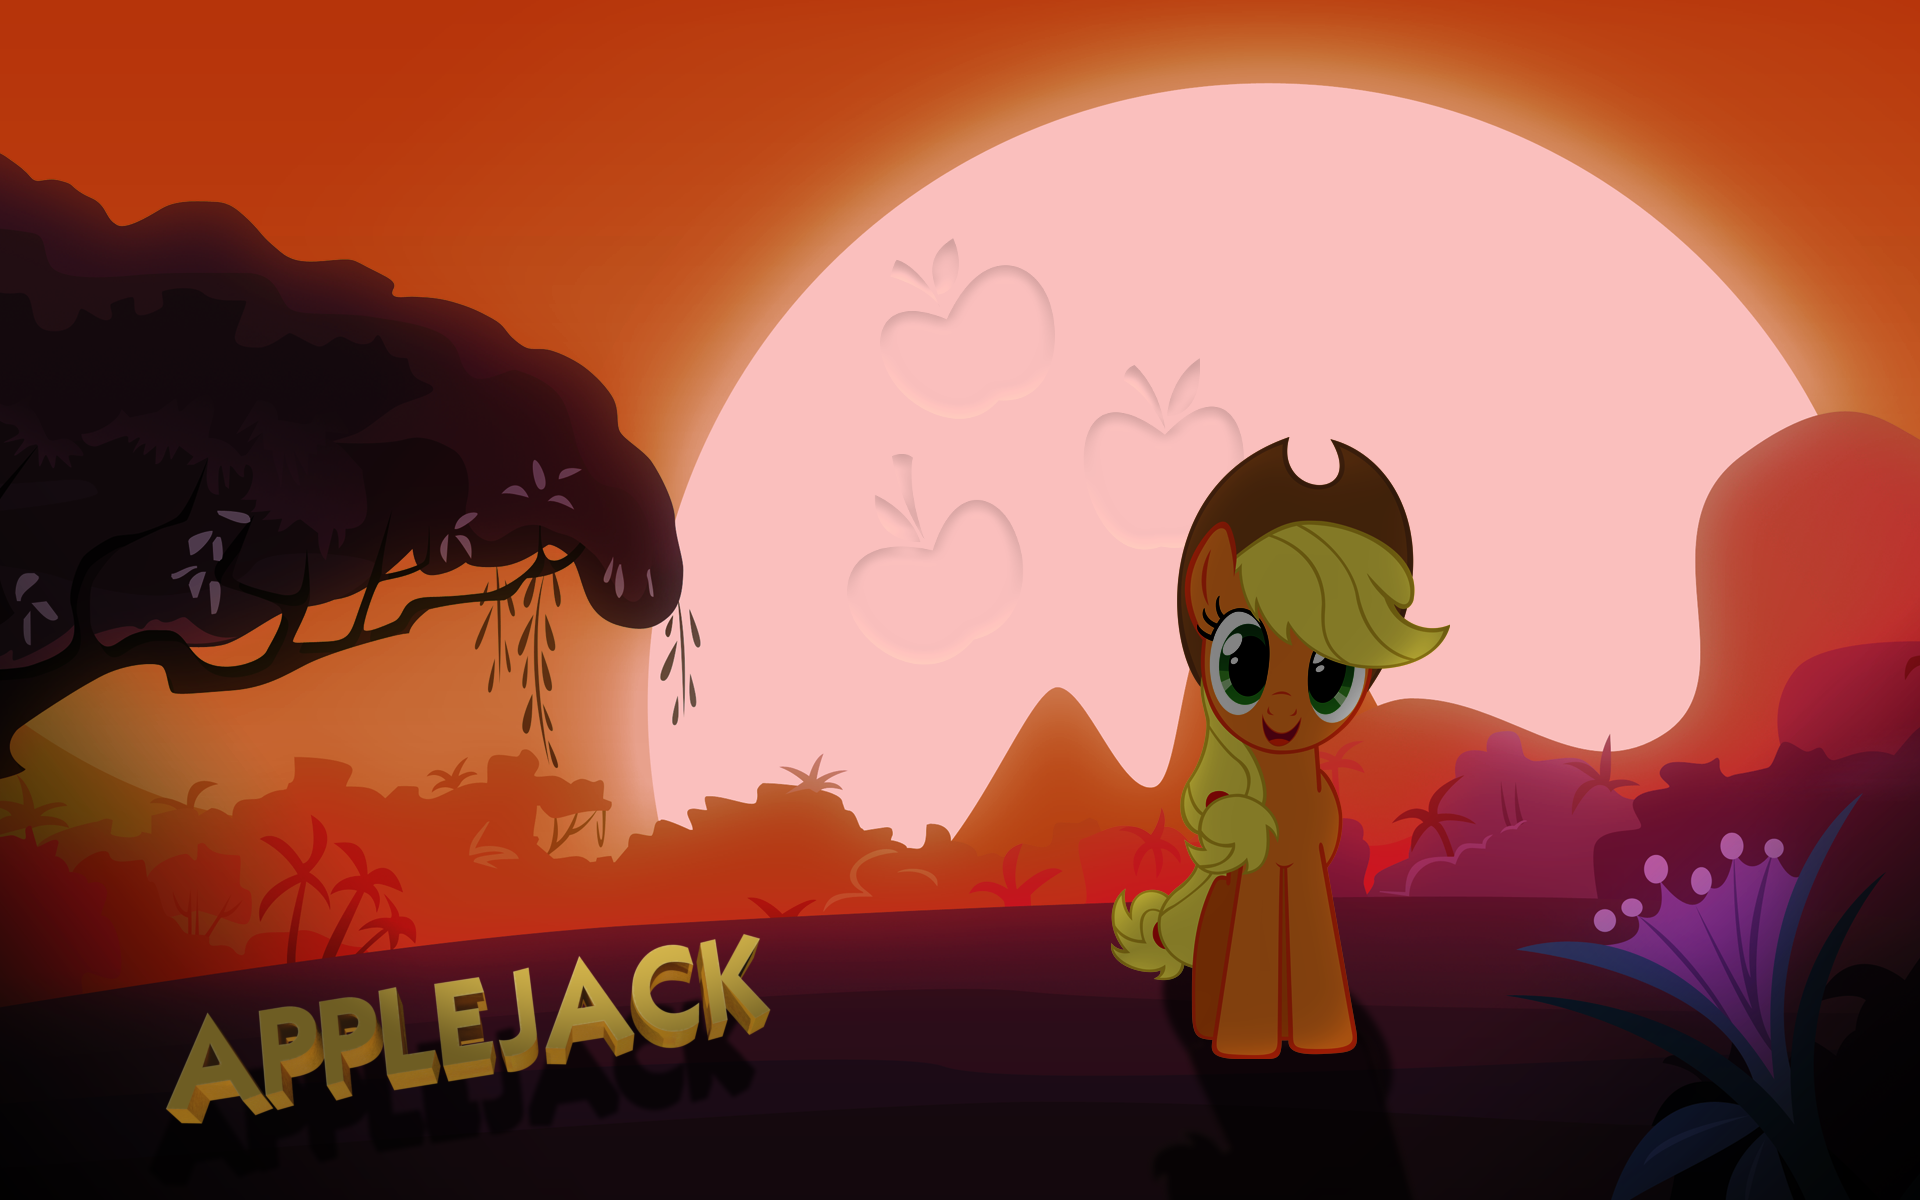 Applejack Sunset by BlackGryph0n, EmbersAtDawn, knight33 and RichHap